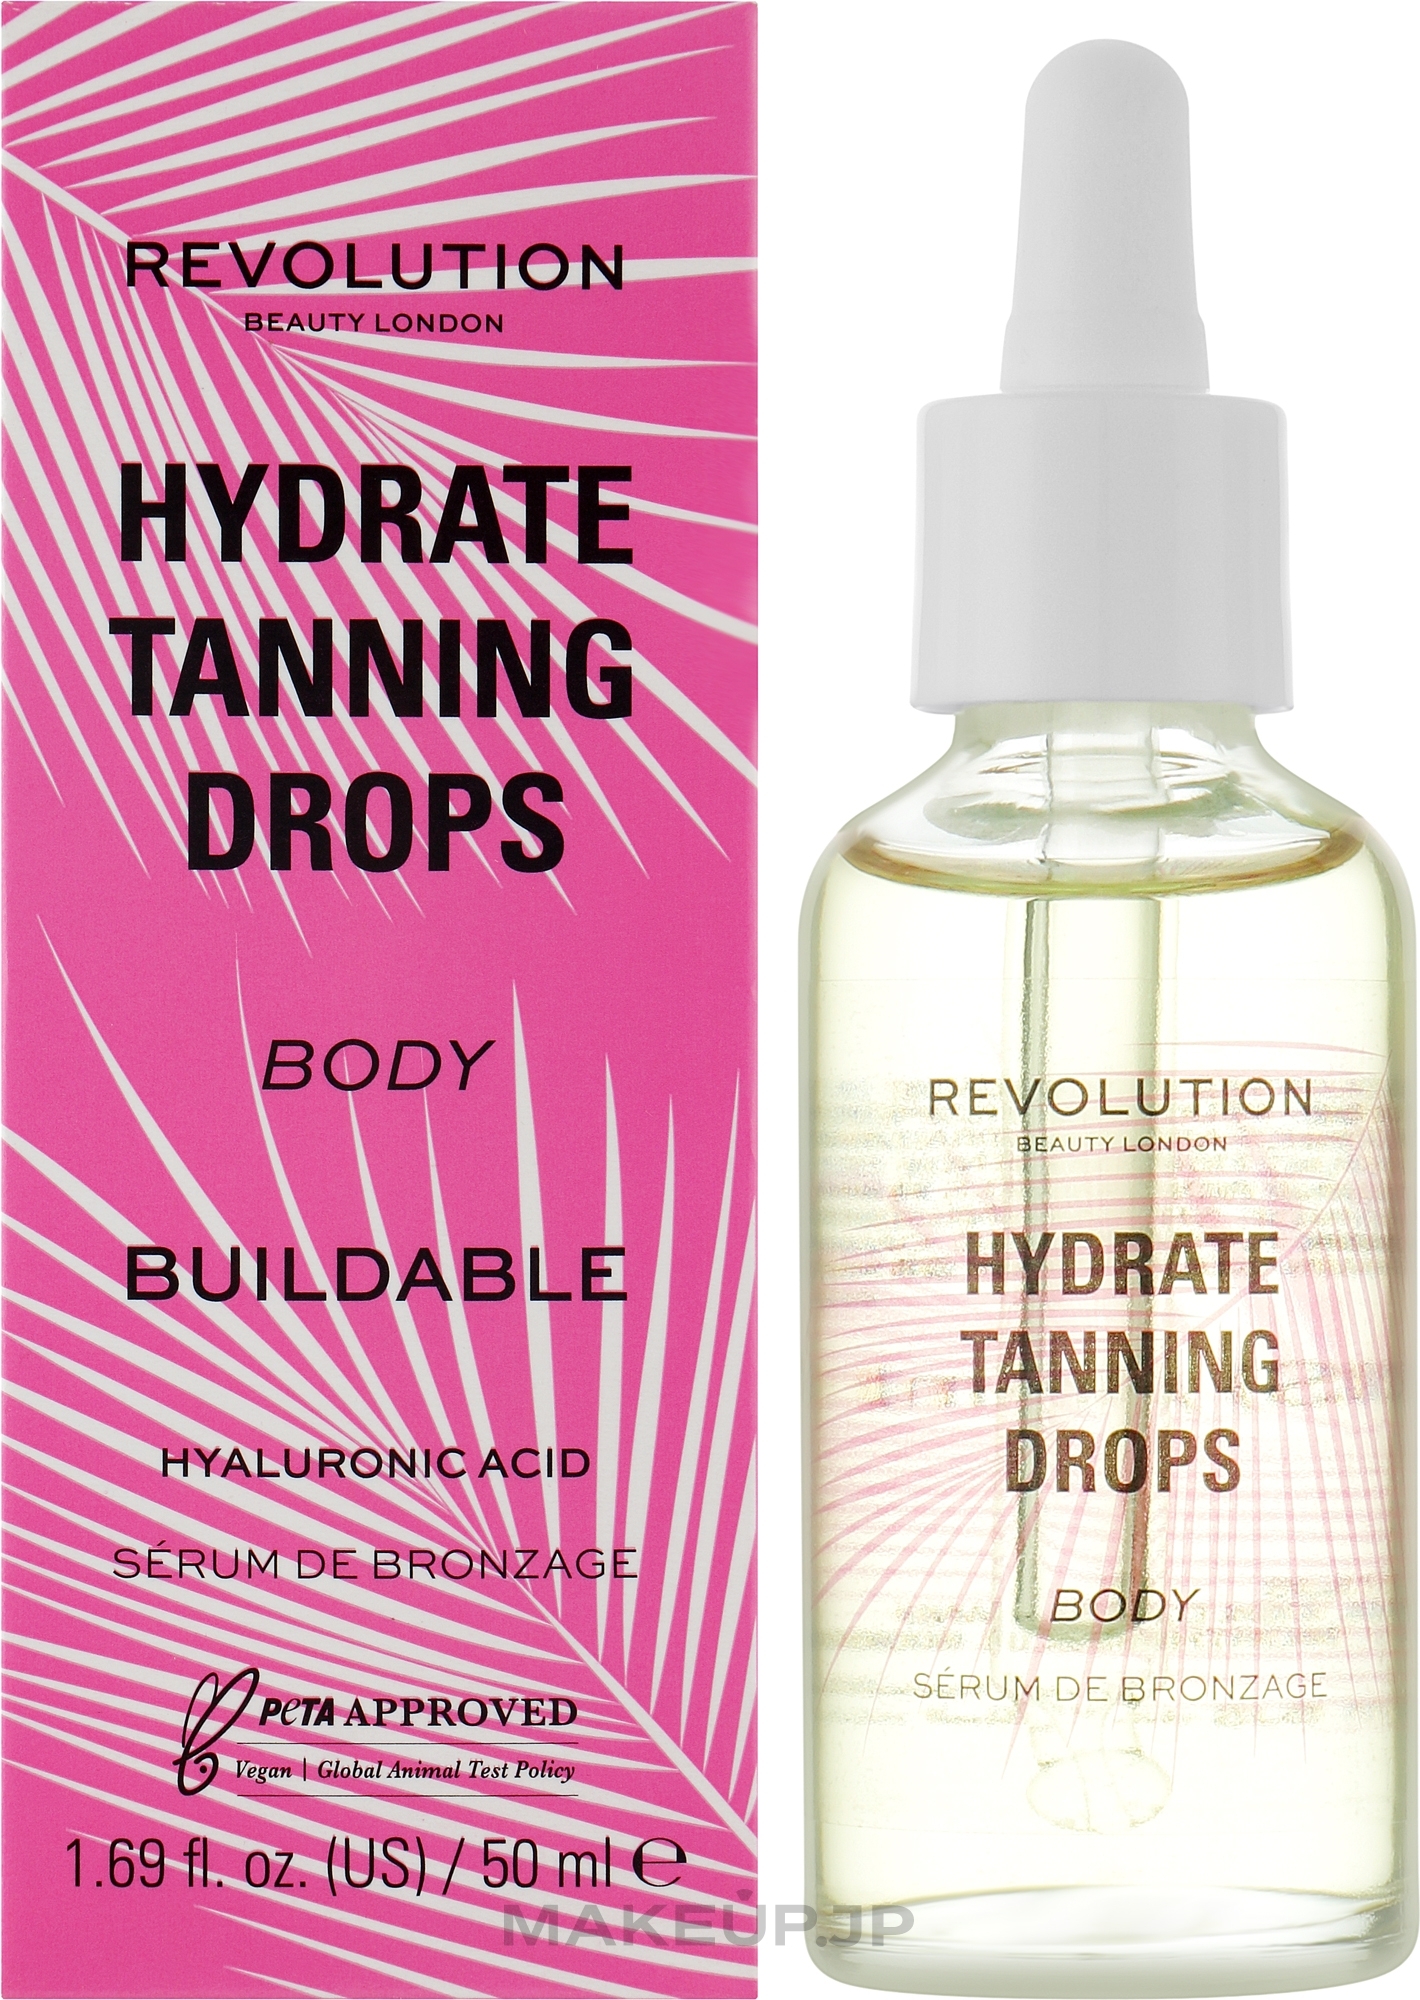 Body Tanning Drops - Makeup Revolution Beauty Hydrate Tanning Drops Body — photo 50 ml